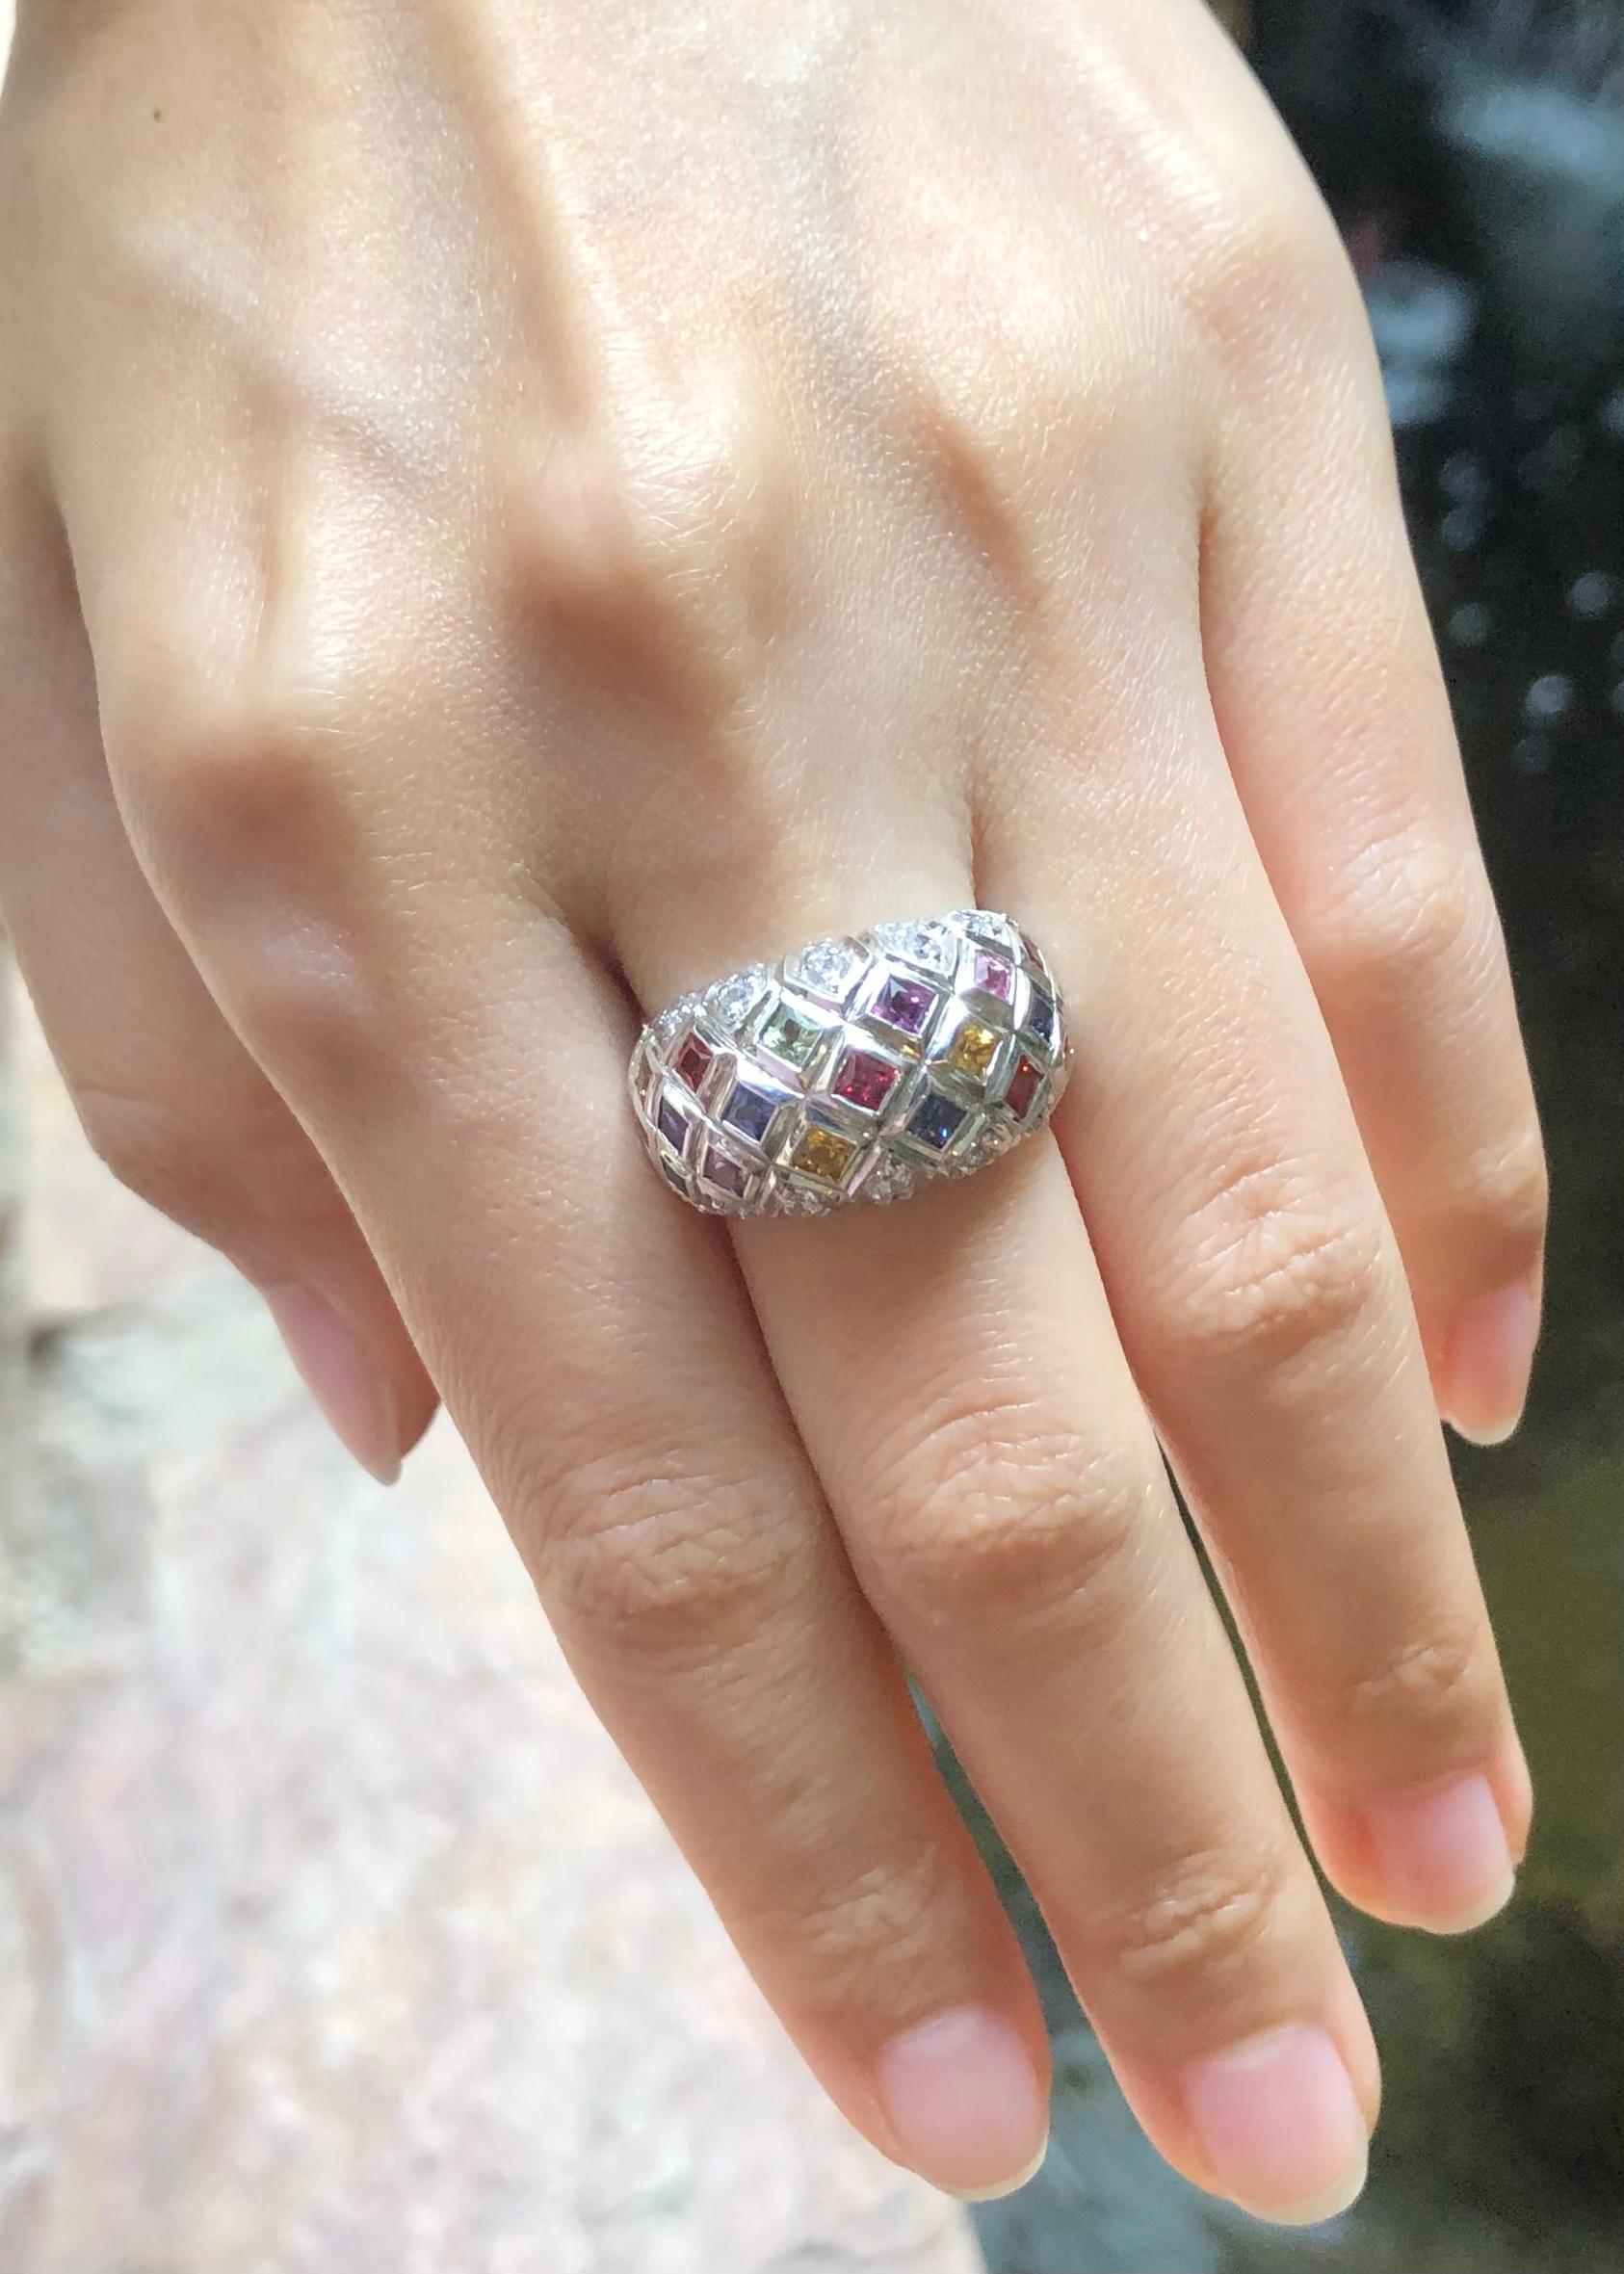 Rainbow Colour Sapphire  with Cubic Zirconia Ring set in Silver Settings

Width:  2.2 cm 
Length: 1.3 cm
Ring Size: 54
Total Weight: 7.36 grams

*Please note that the silver setting is plated with rhodium to promote shine and help prevent oxidation.